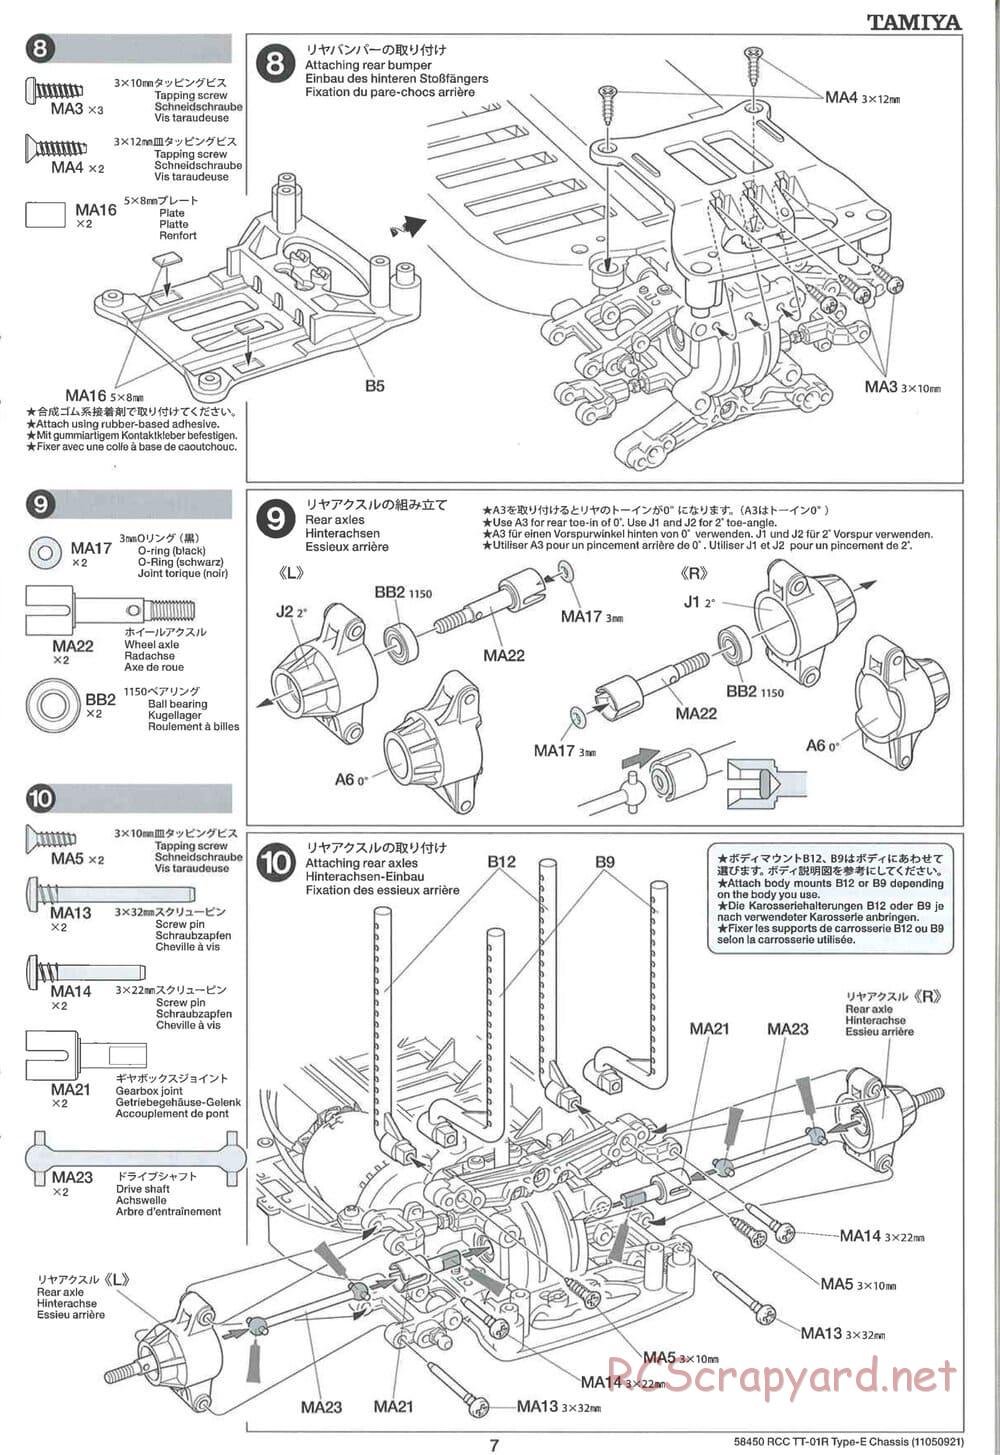 Tamiya - TT-01R Type-E Chassis - Manual - Page 7